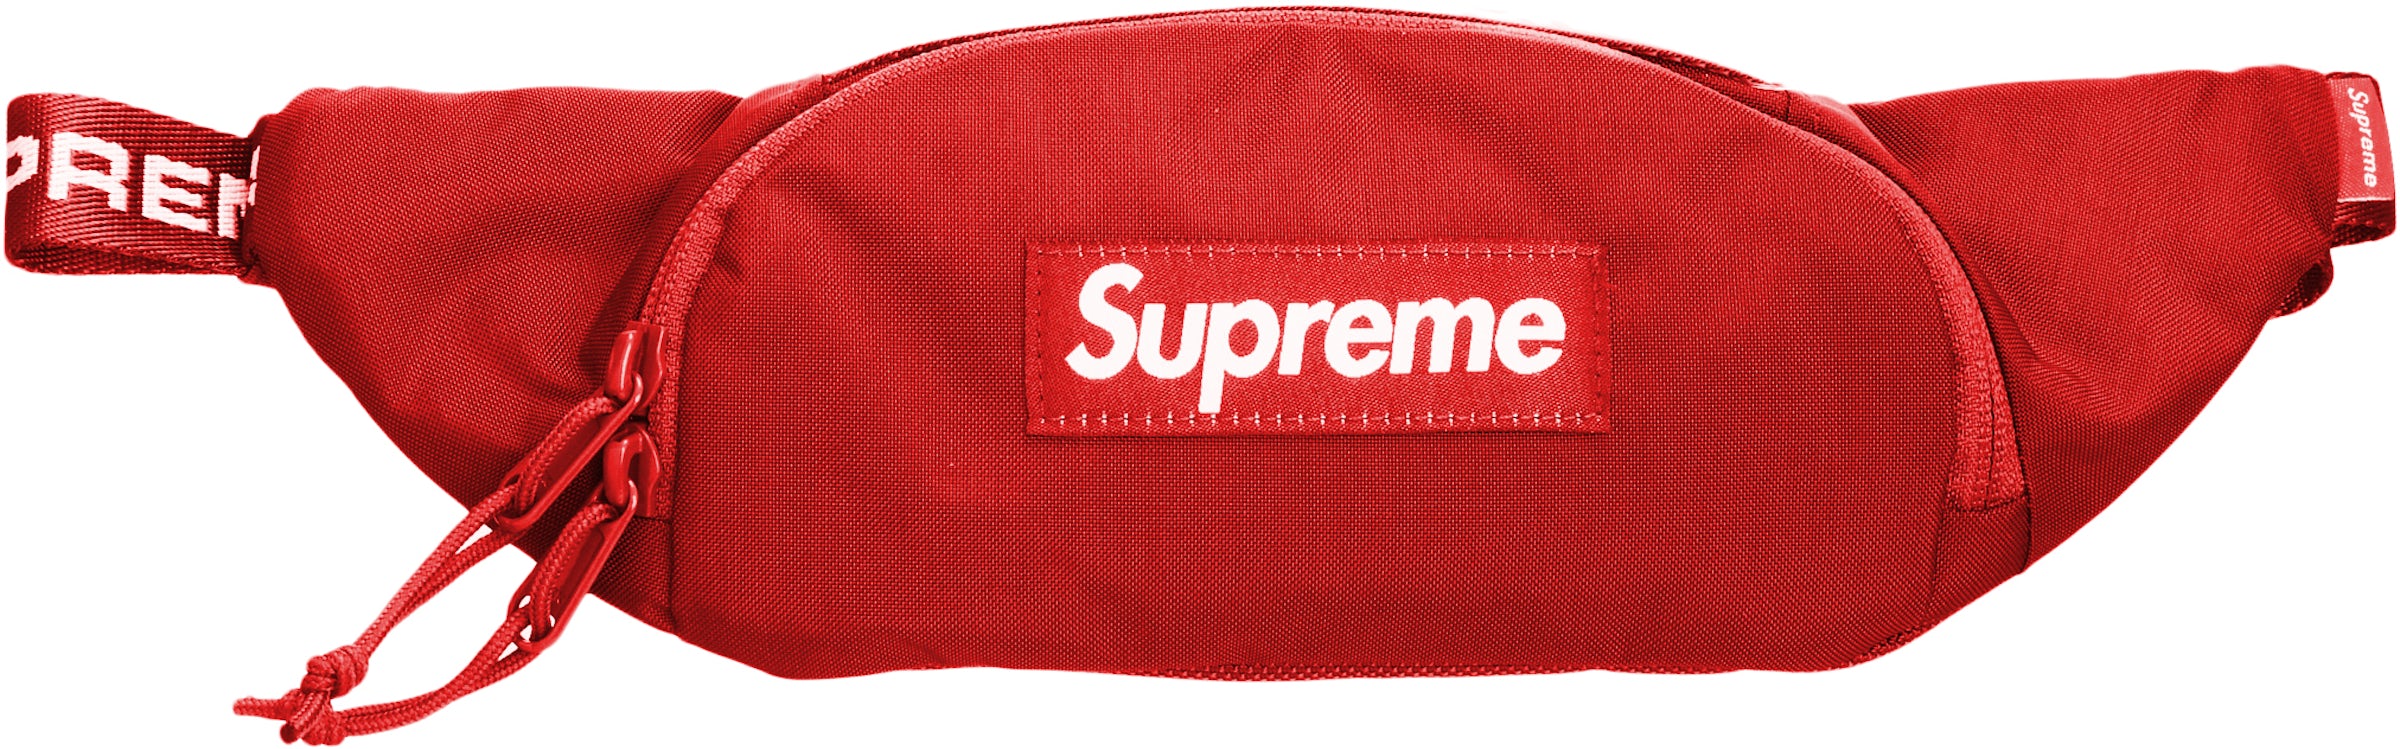 Buy Supreme Backpack 'Red' - FW22B7 RED